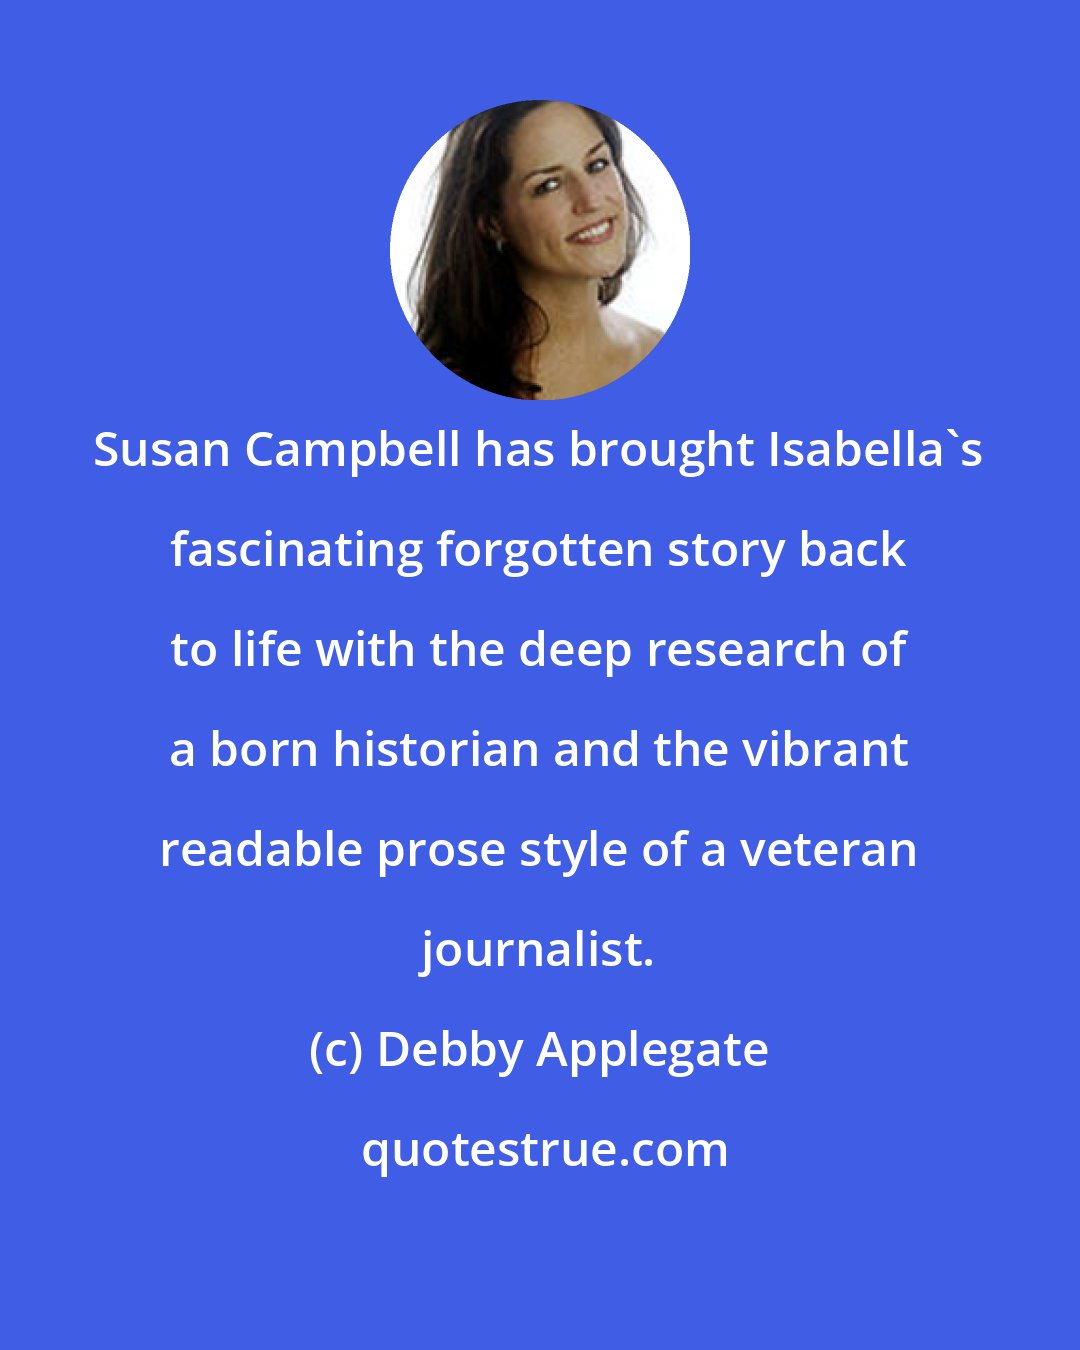 Debby Applegate: Susan Campbell has brought Isabella's fascinating forgotten story back to life with the deep research of a born historian and the vibrant readable prose style of a veteran journalist.